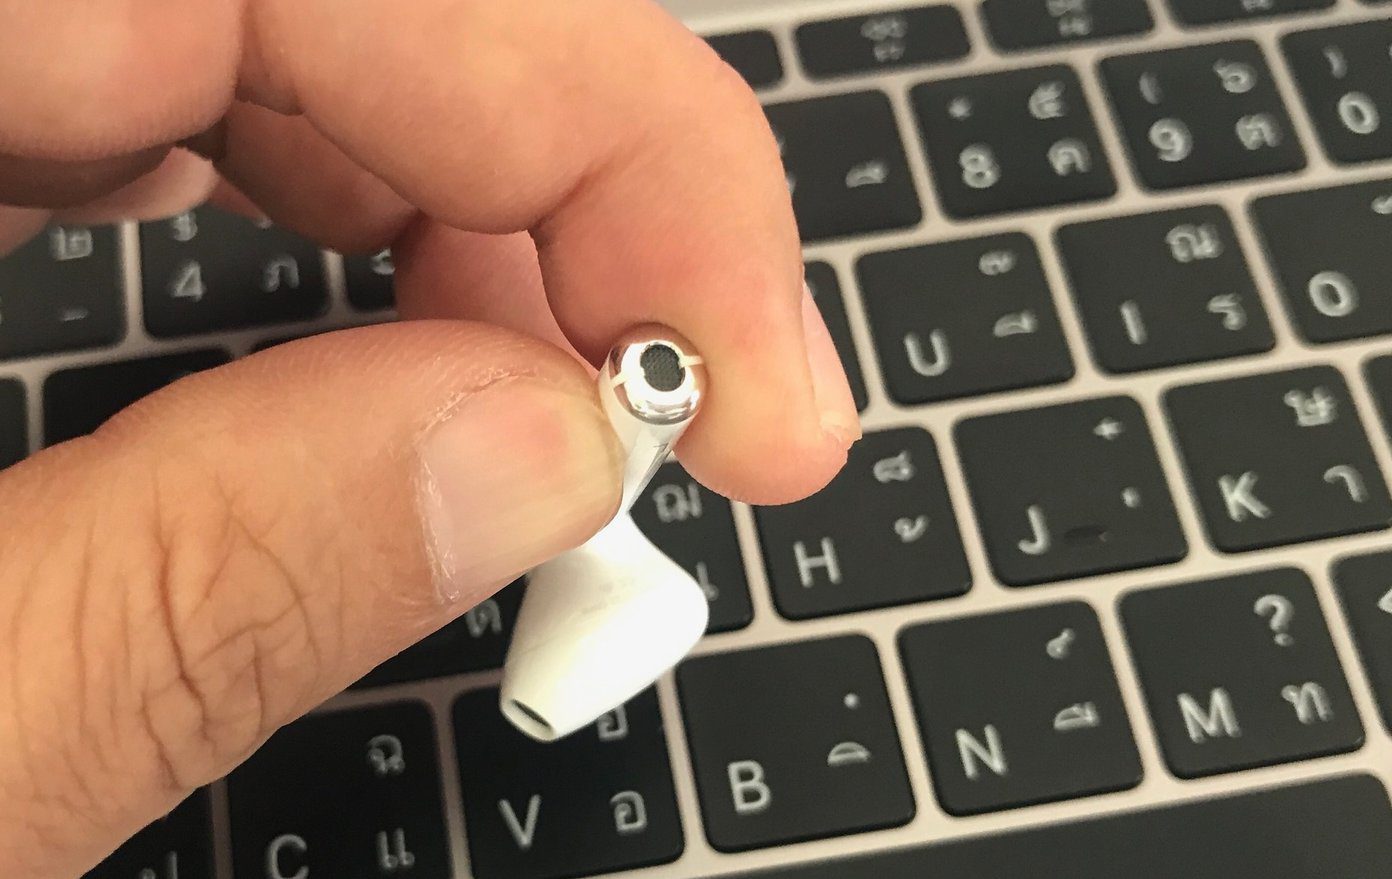 Fix airpods not charging image